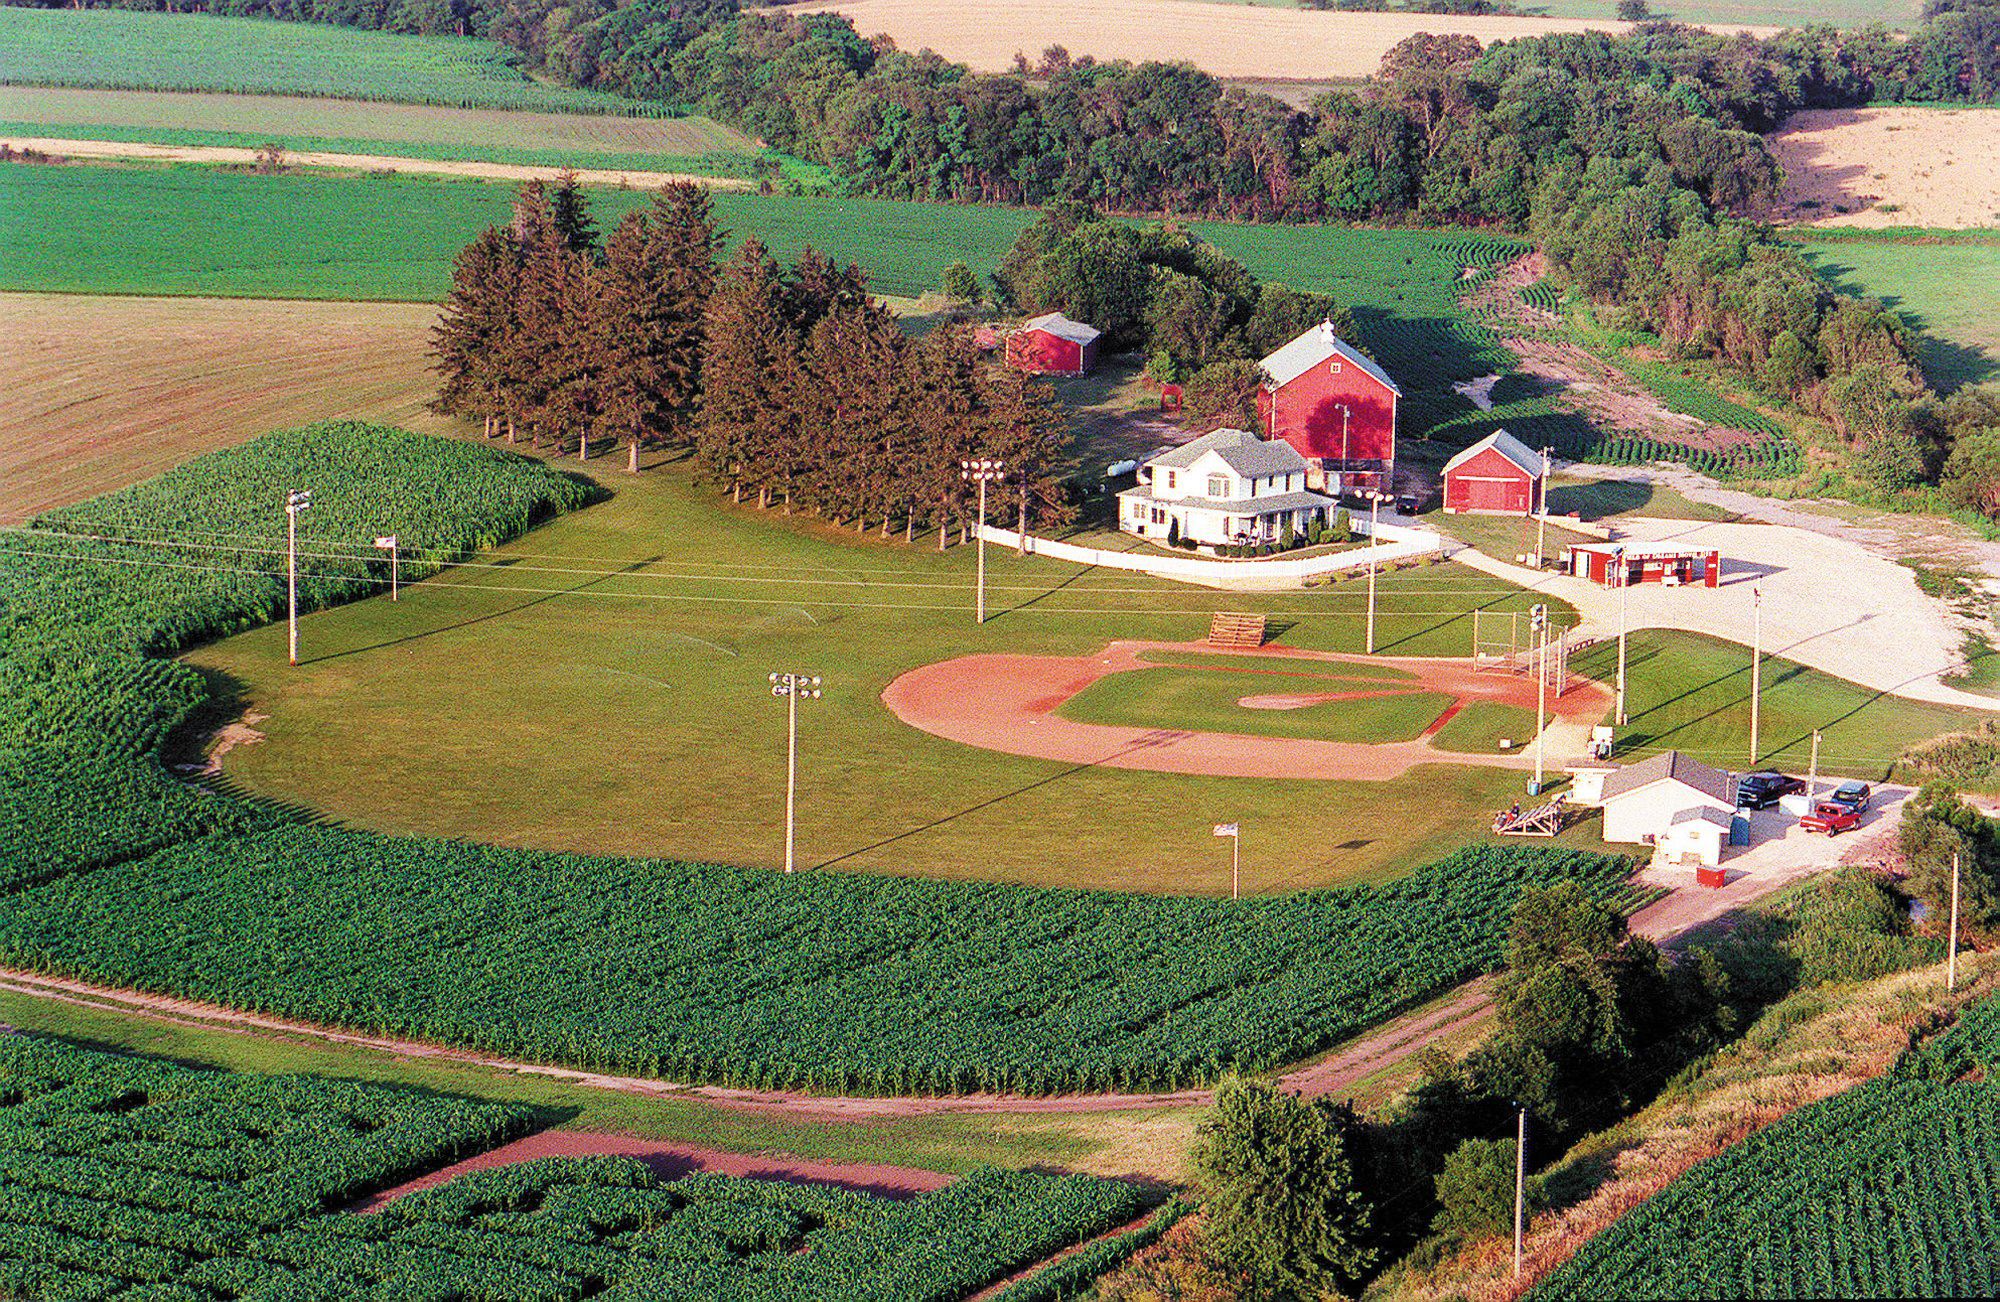 MLB's 'Field of Dreams' game in Iowa postponed to 2021 because of